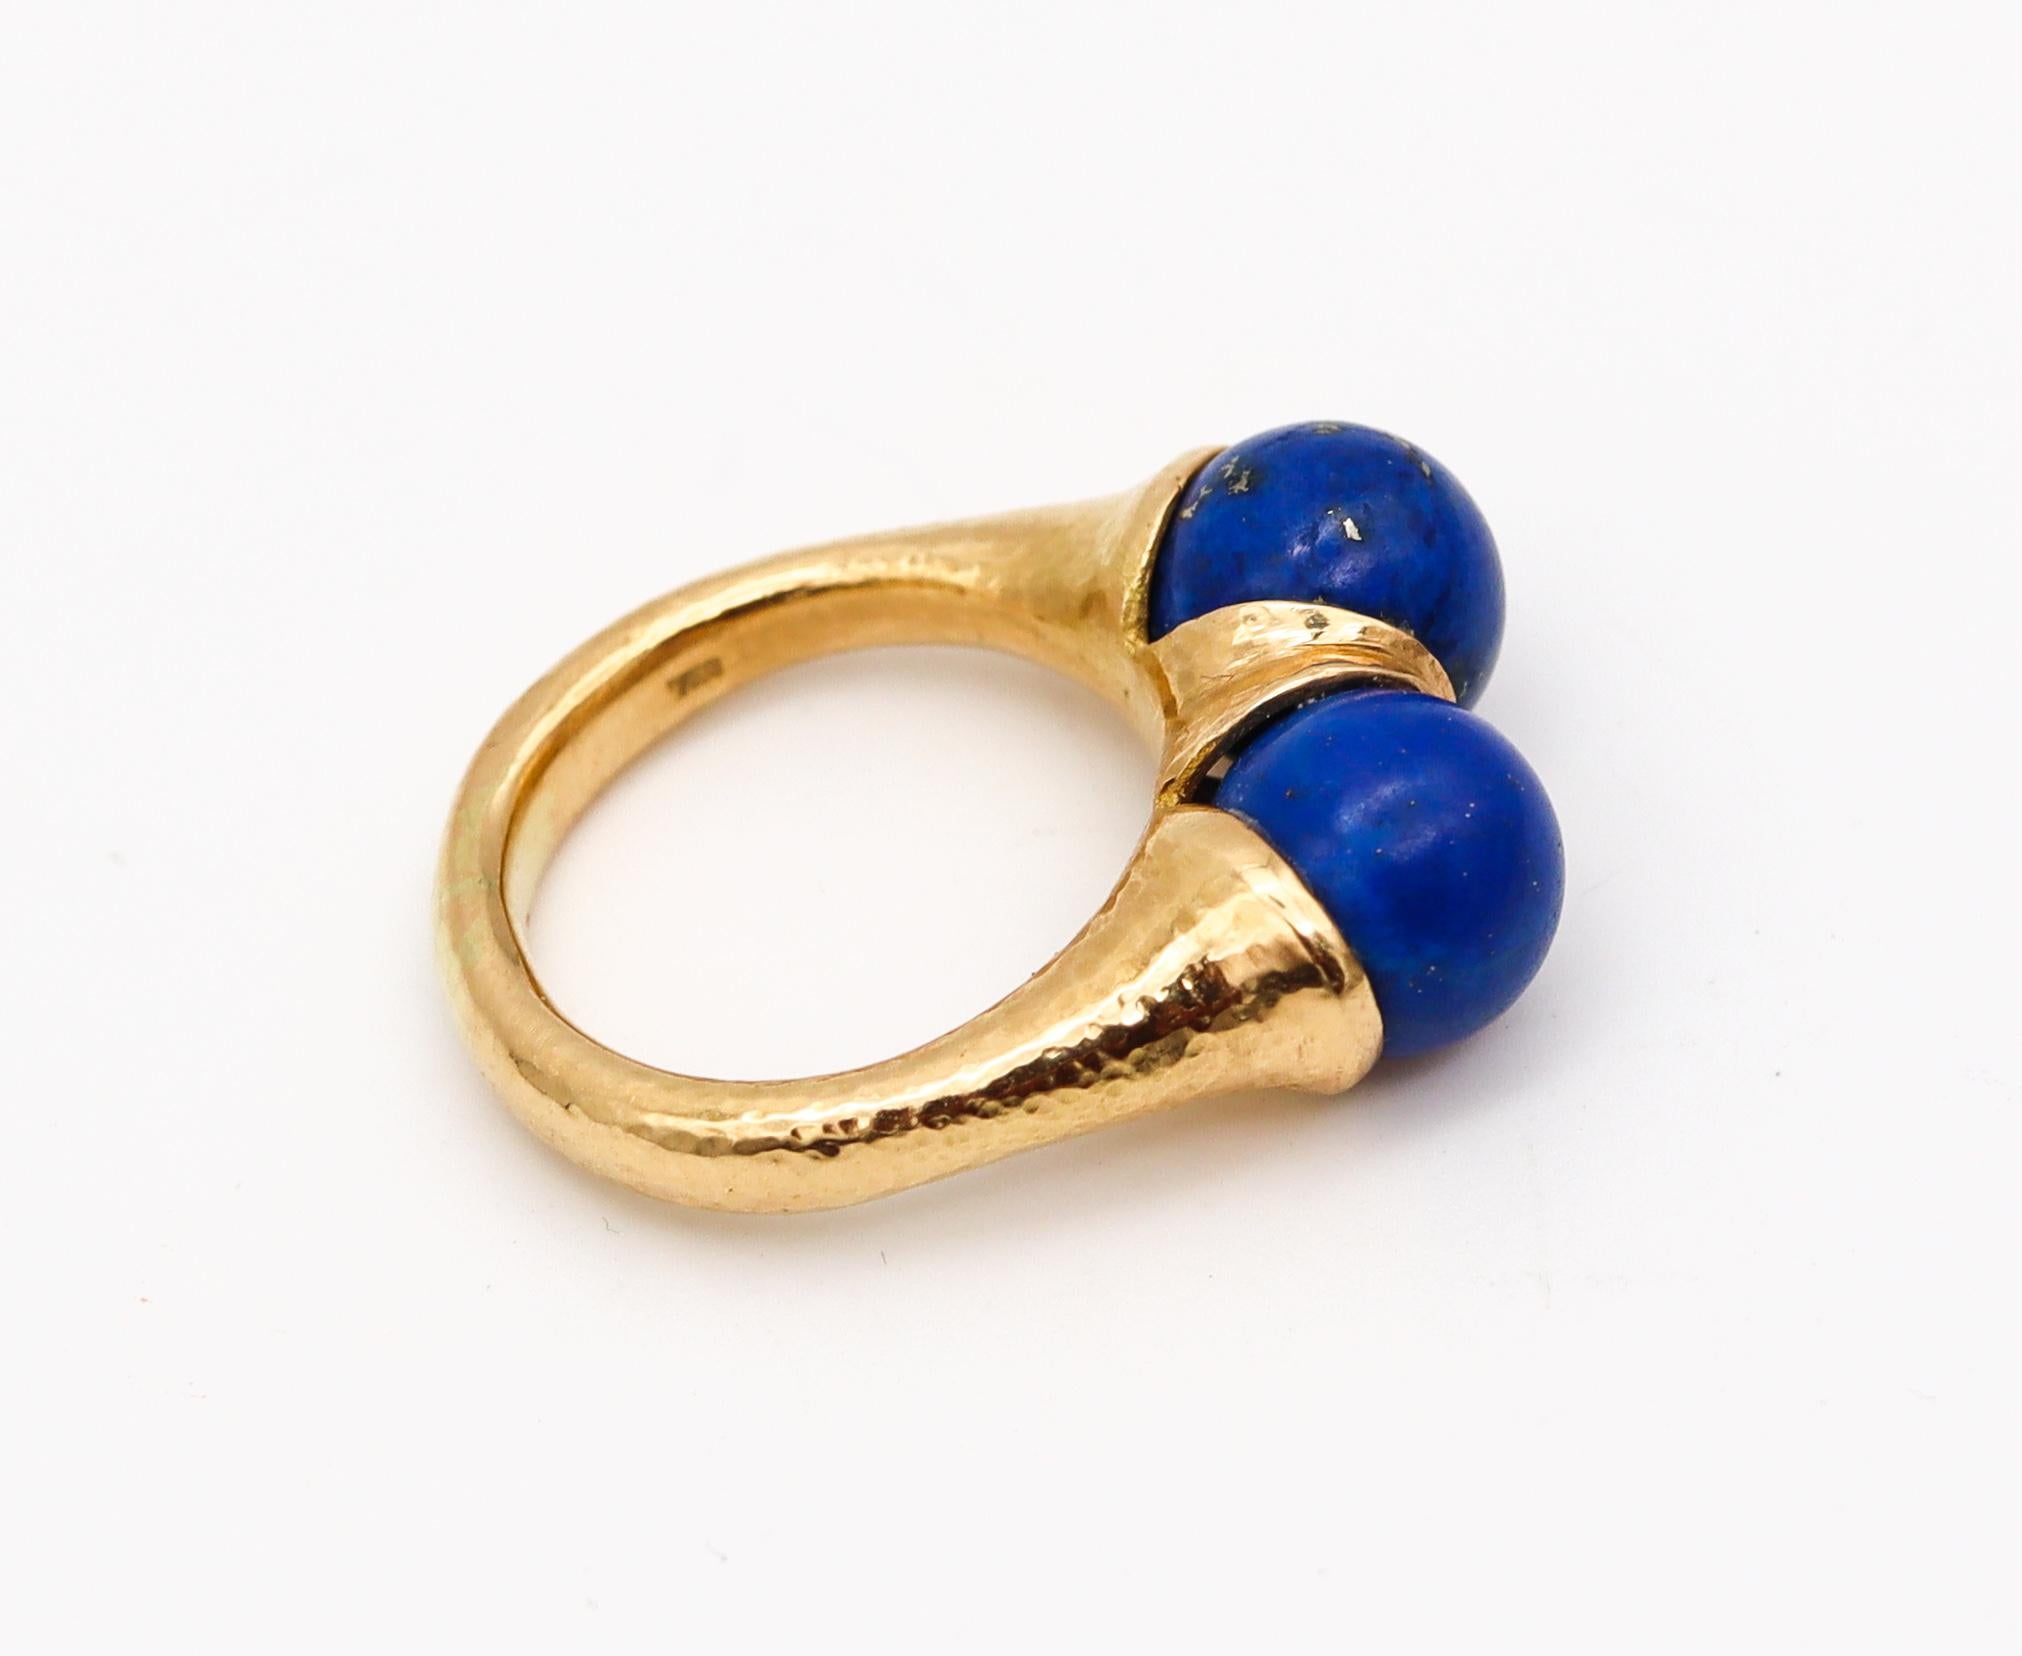 Greek Revival Modernist Sculptural Greek Ring in Hammered 18Kt Yellow Gold with Lapis Lazuli For Sale